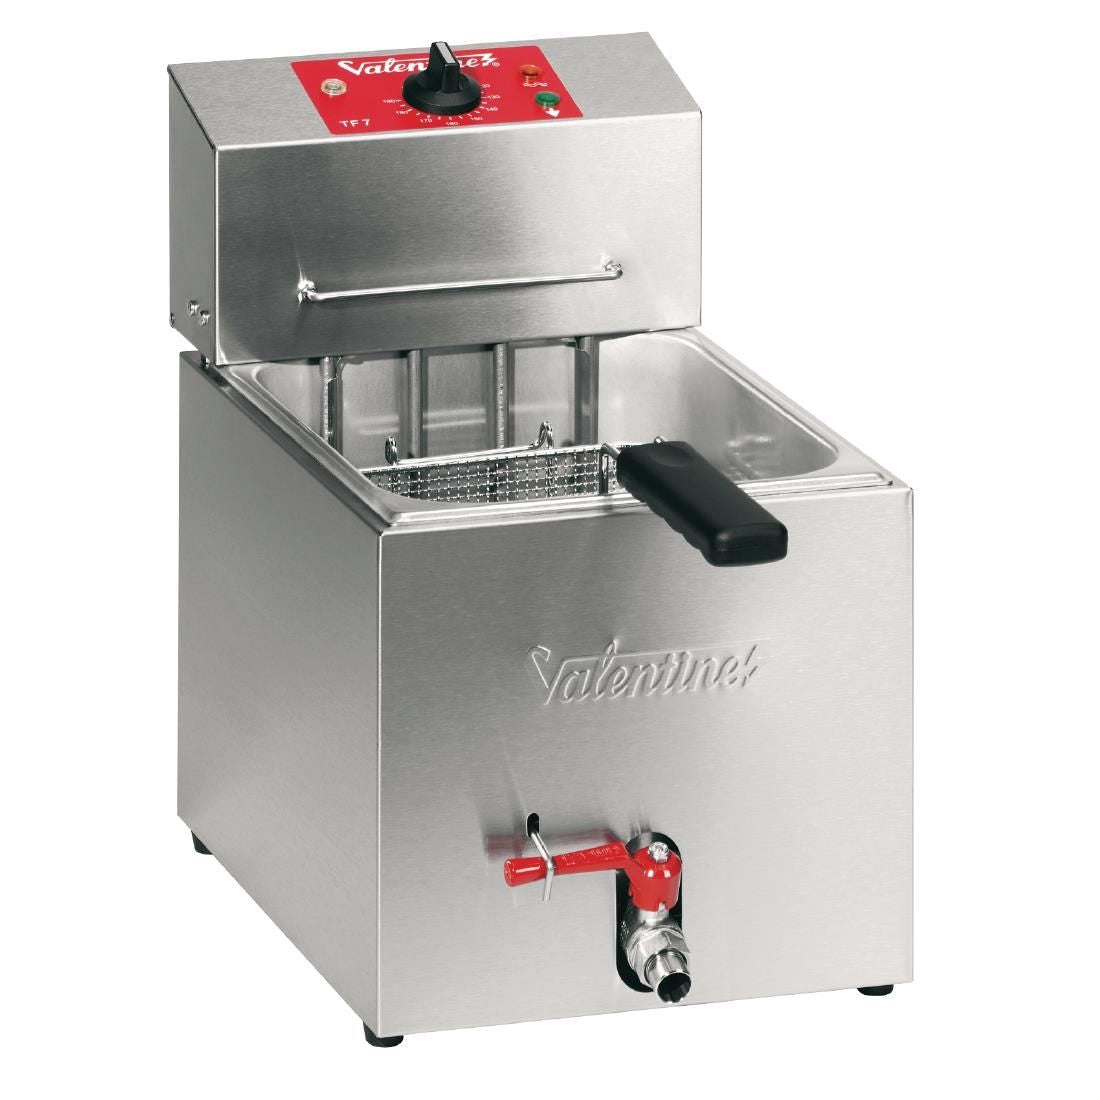 FB405 Valentine Countertop Electric Fryer 7Ltr TF7 JD Catering Equipment Solutions Ltd